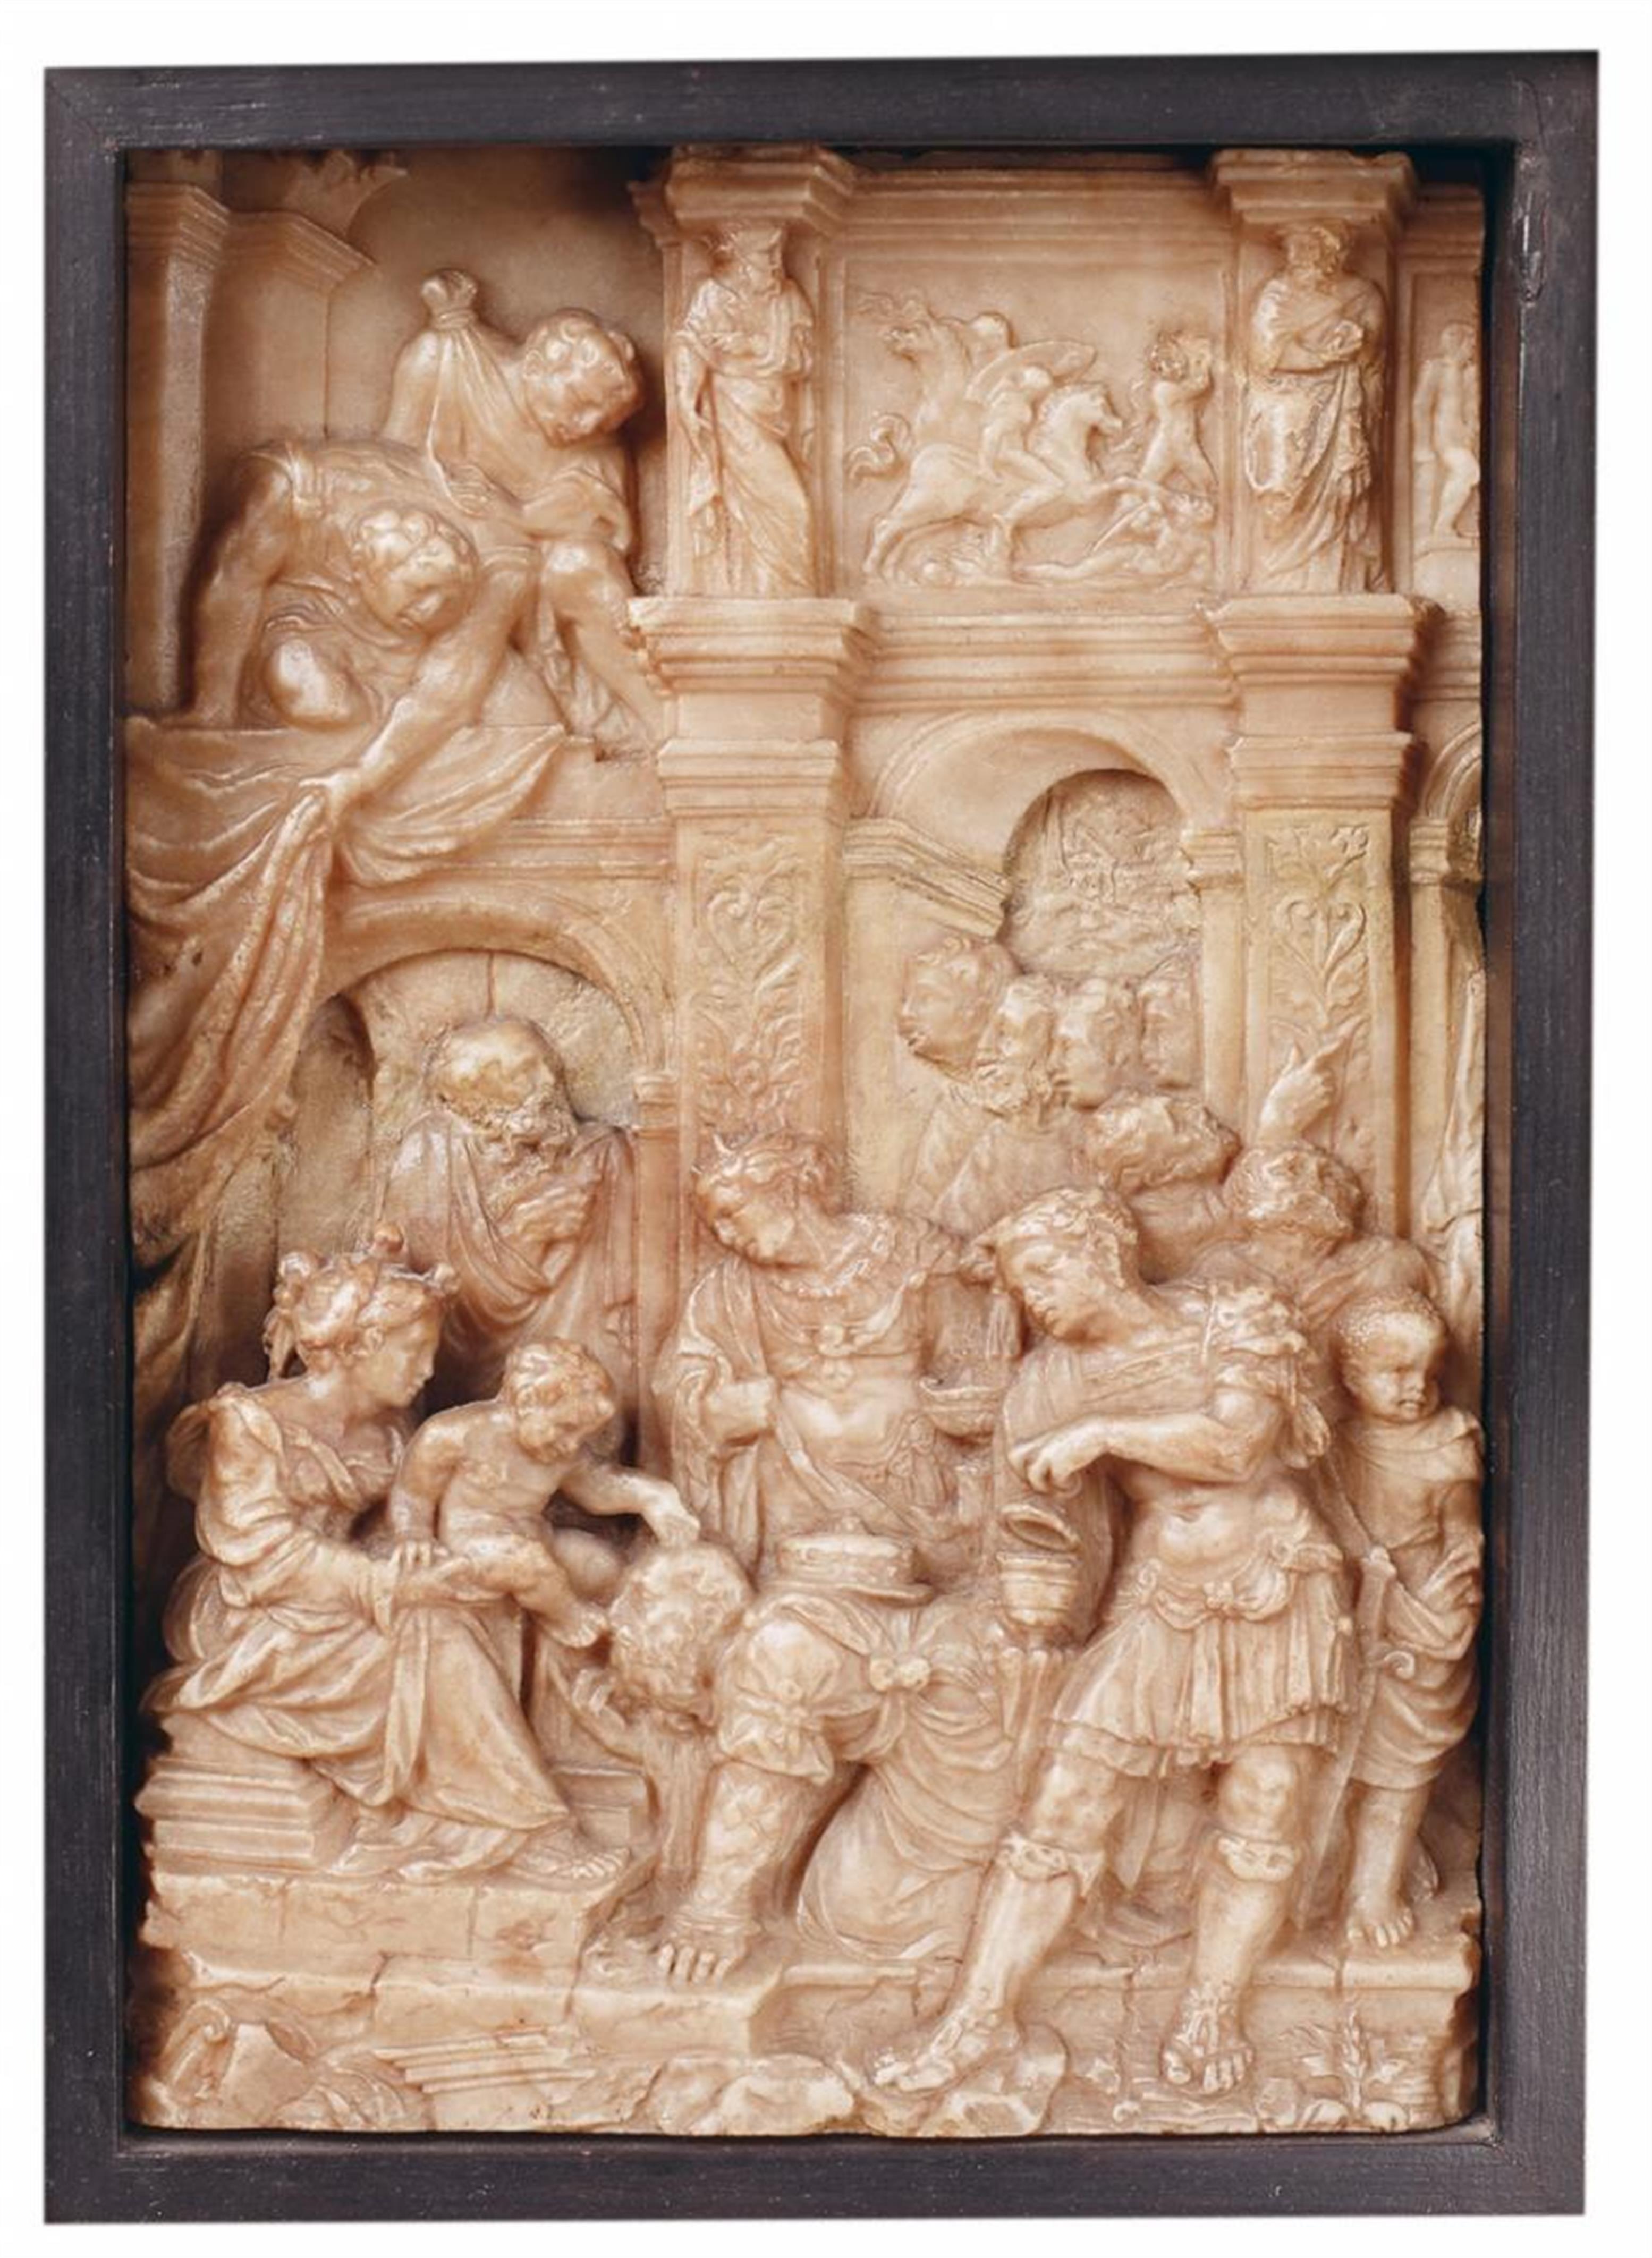 Probably Mecheln (?), late 16th Century - A LATE 16TH CENTURY MECHELN ALABASTER GROUP OF THE ADORATION OF THE MAGI, LATE 16TH CENTURY - image-1